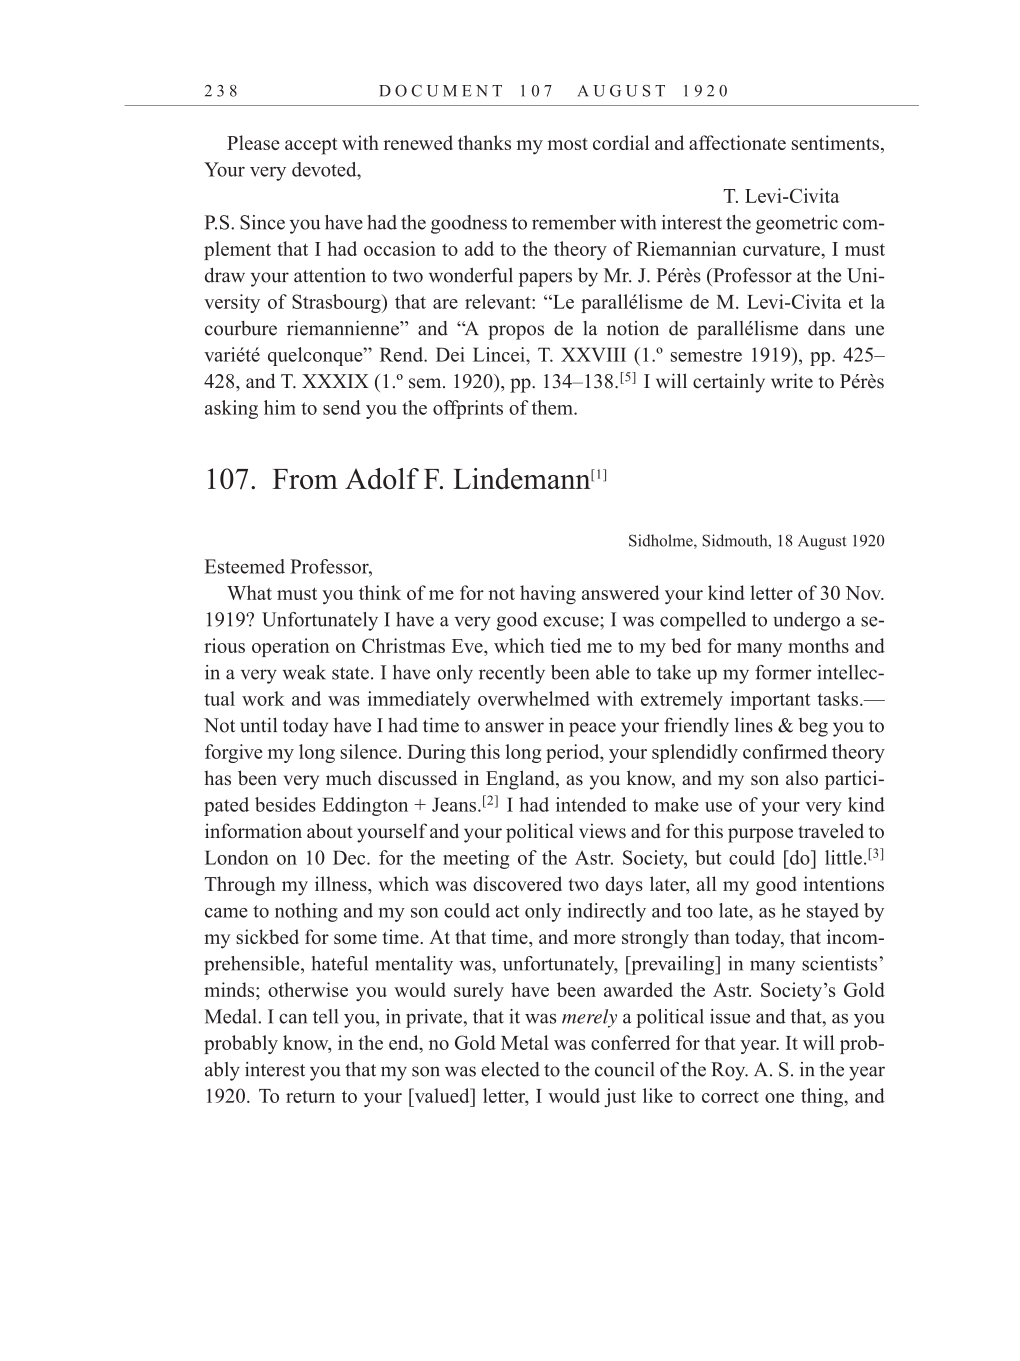 Volume 10: The Berlin Years: Correspondence, May-December 1920, and Supplementary Correspondence, 1909-1920 (English translation supplement) page 238